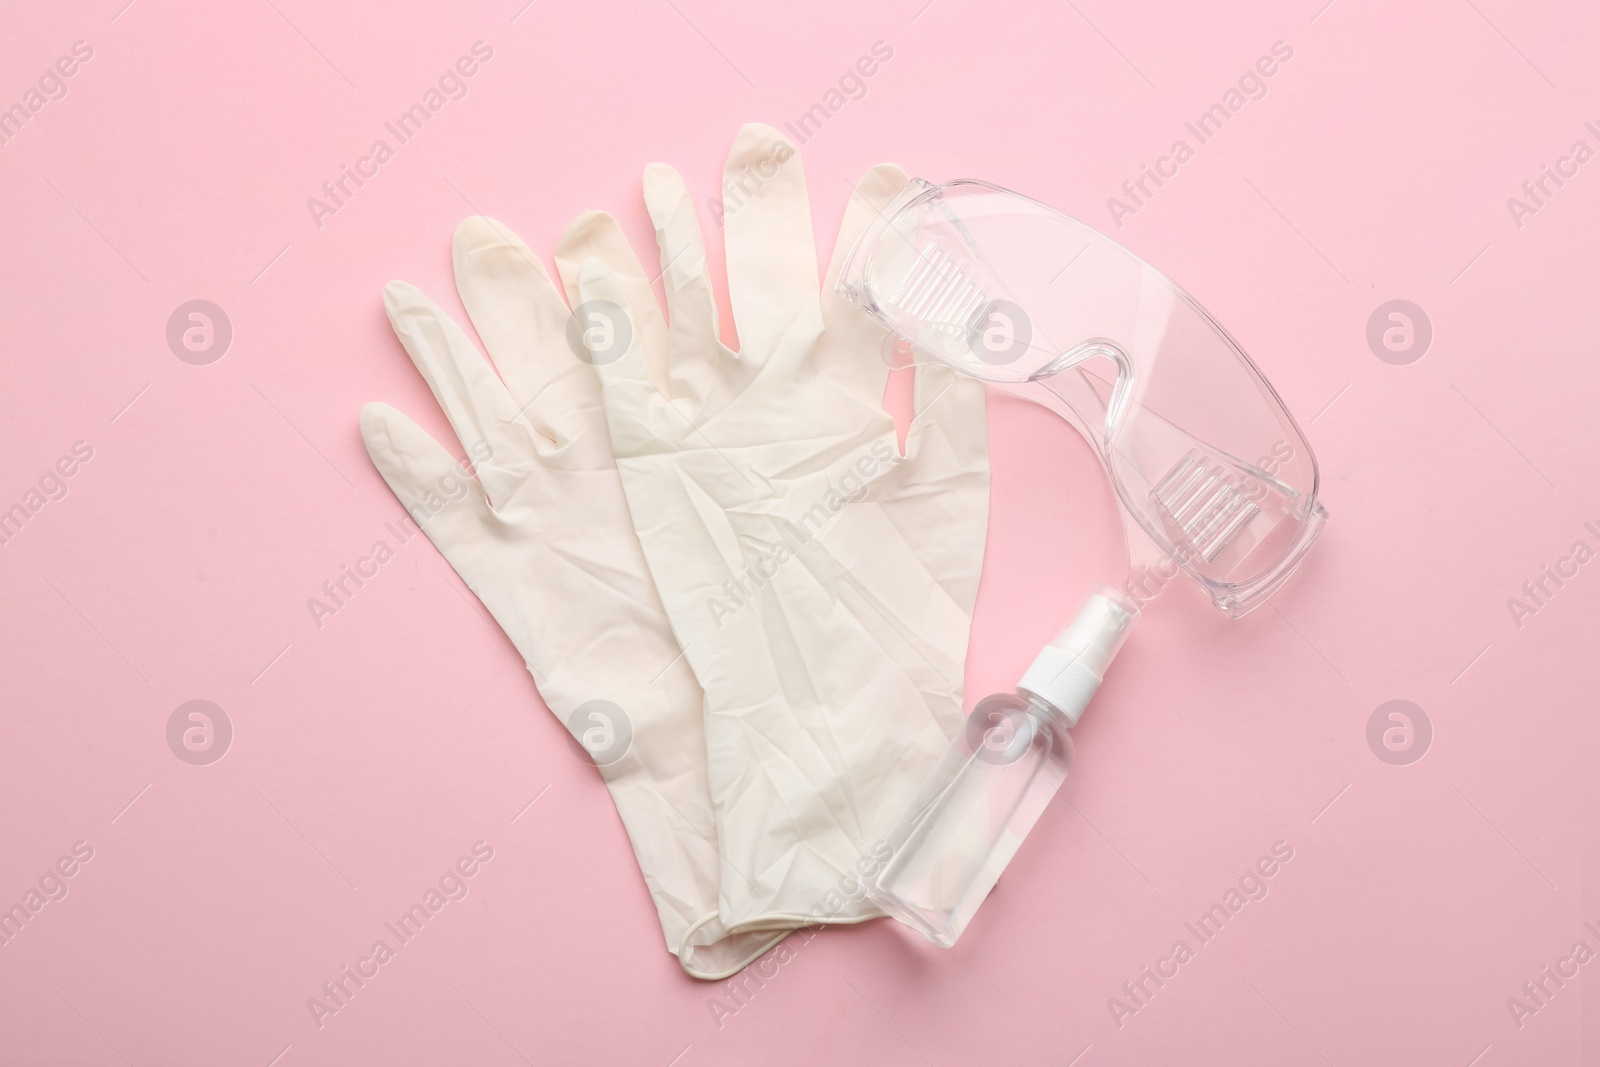 Photo of Medical gloves, goggles and hand sanitizer on pink background, flat lay